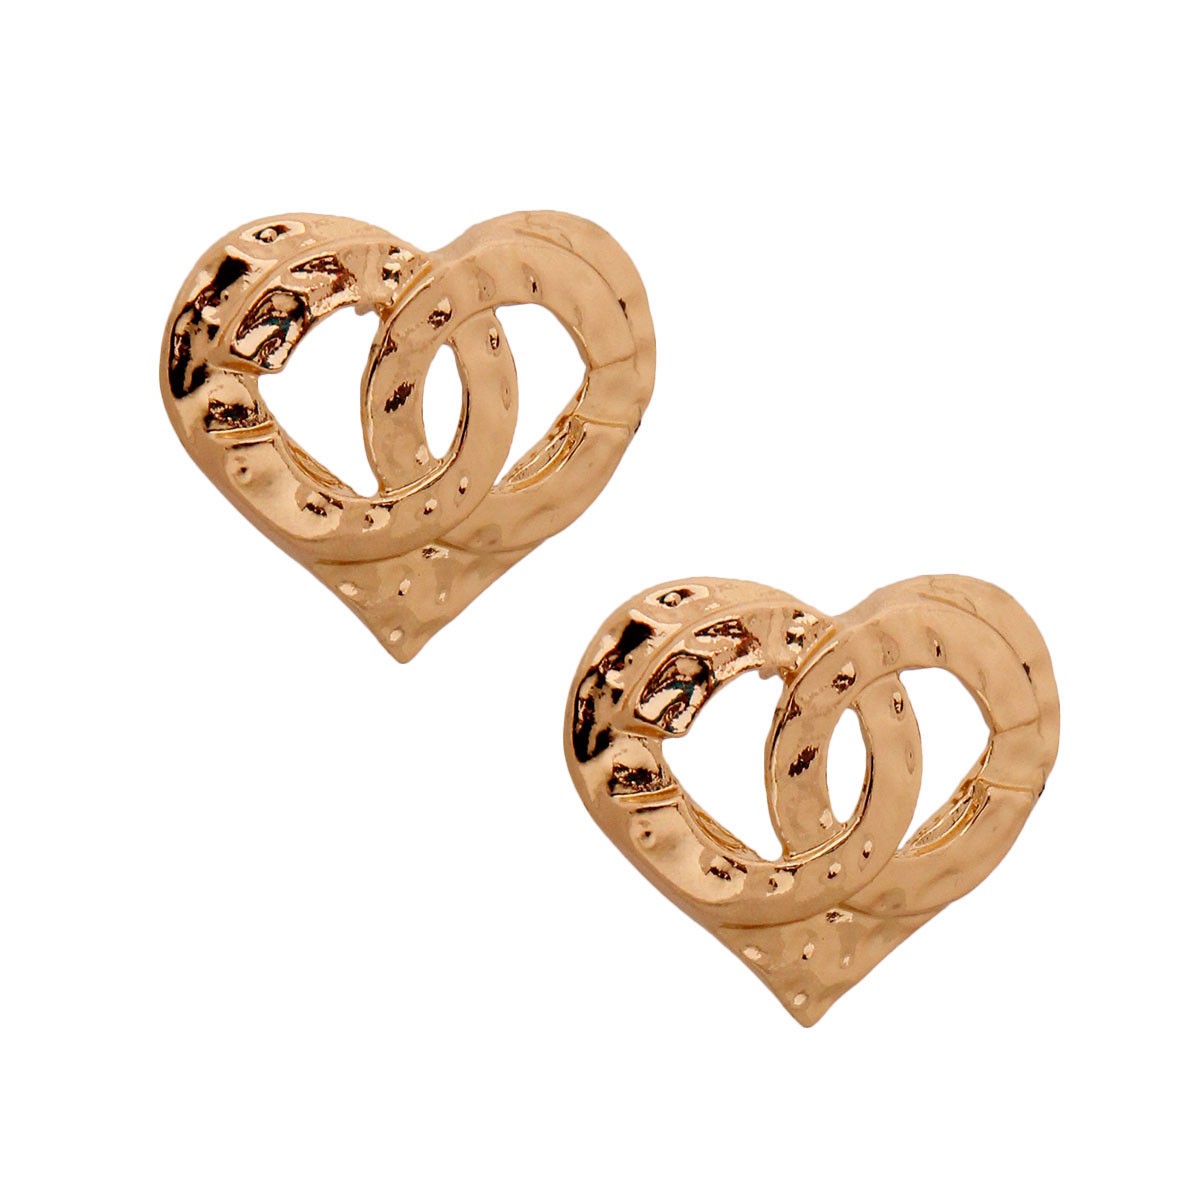 Chanel Inspired Heart Shaped Studs